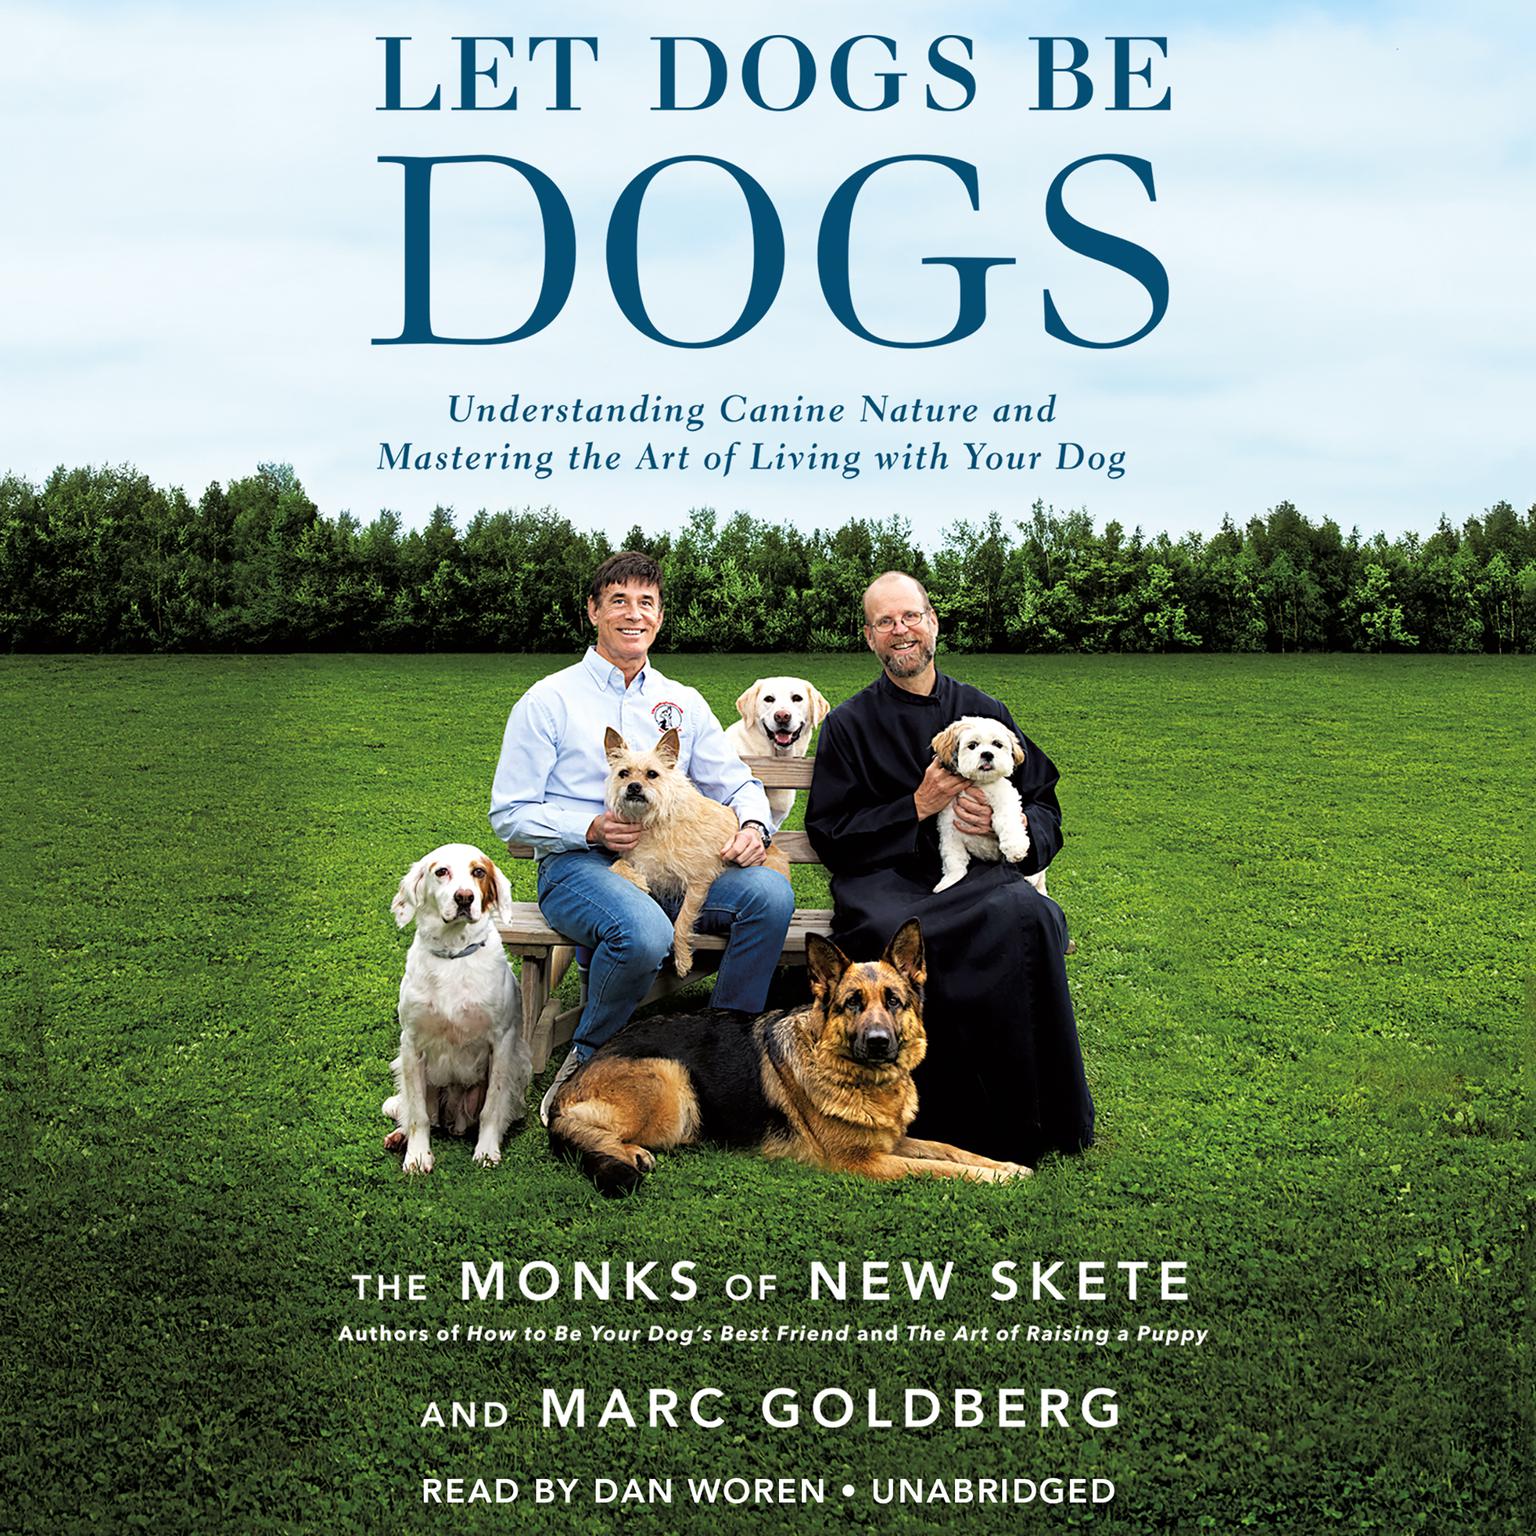 Let Dogs Be Dogs: Understanding Canine Nature and Mastering the Art of Living with Your Dog Audiobook, by The Monks of New Skete